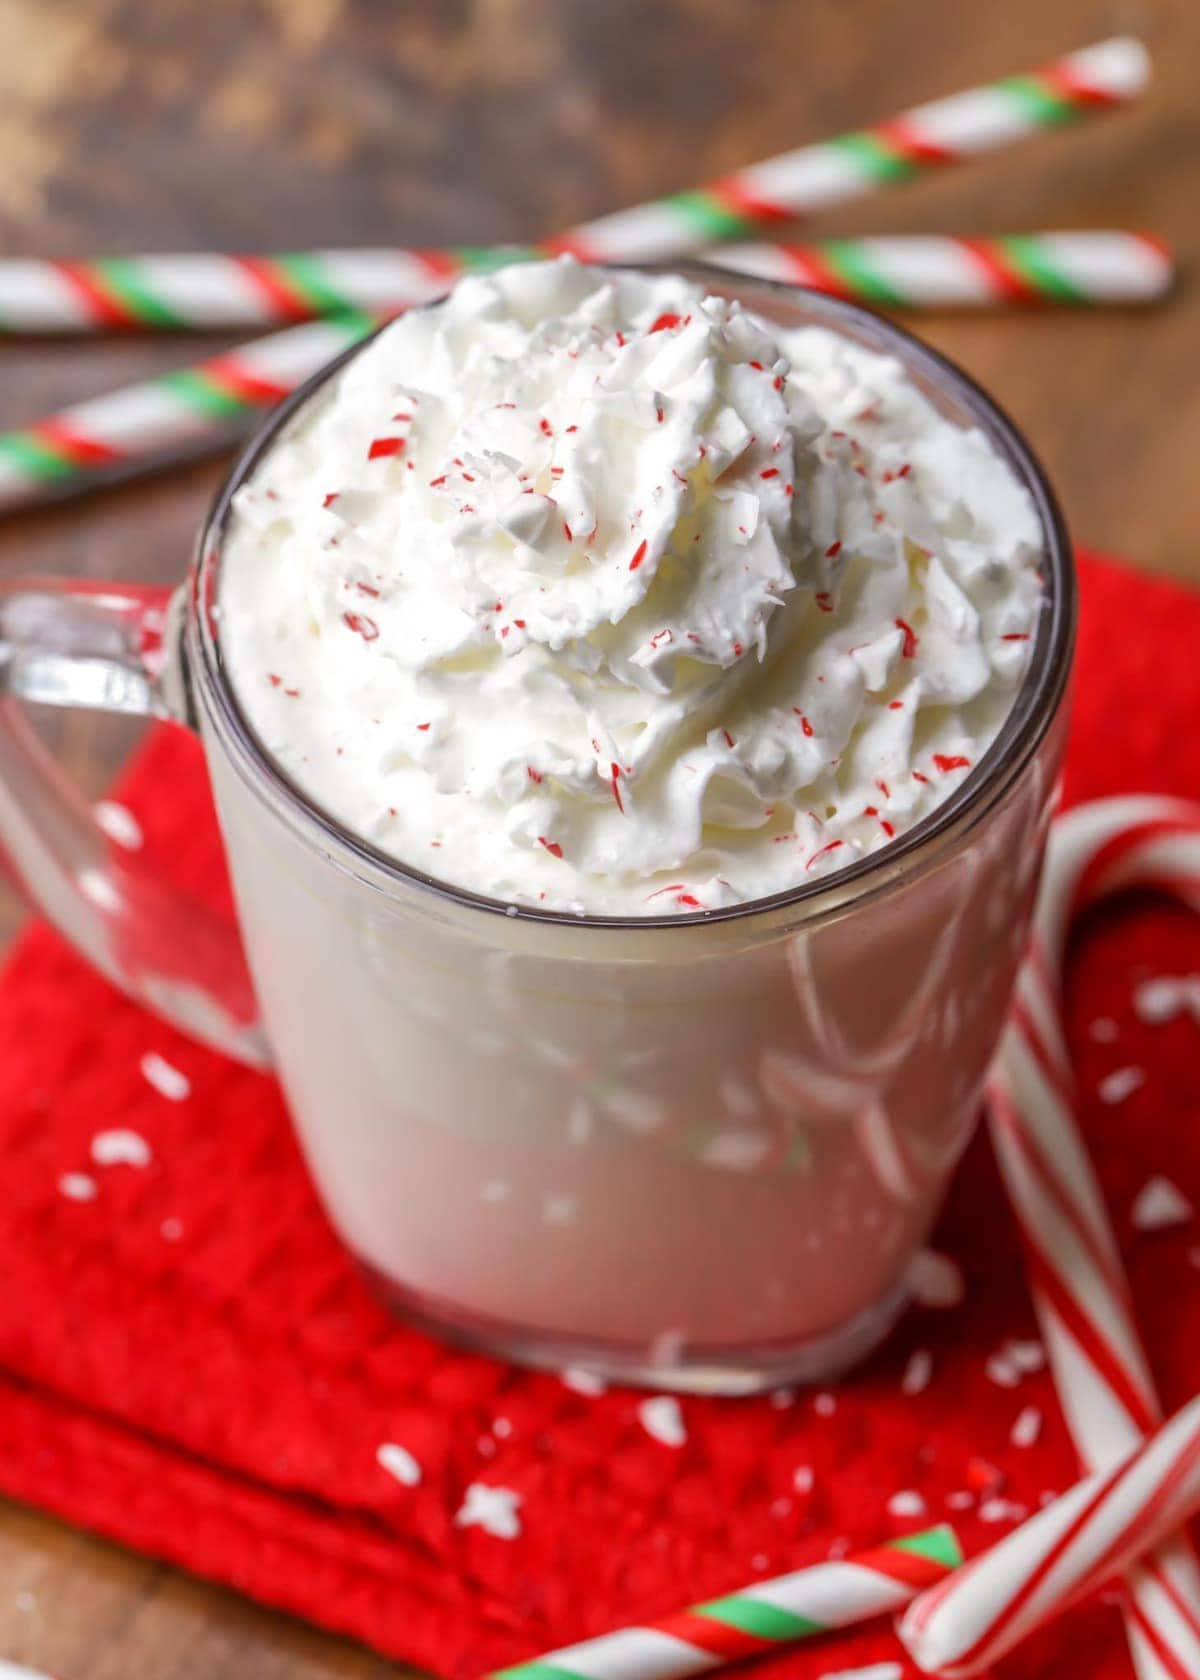 Christmas drink recipes - white chocolate peppermint hot cocoa topped with whipped cream.